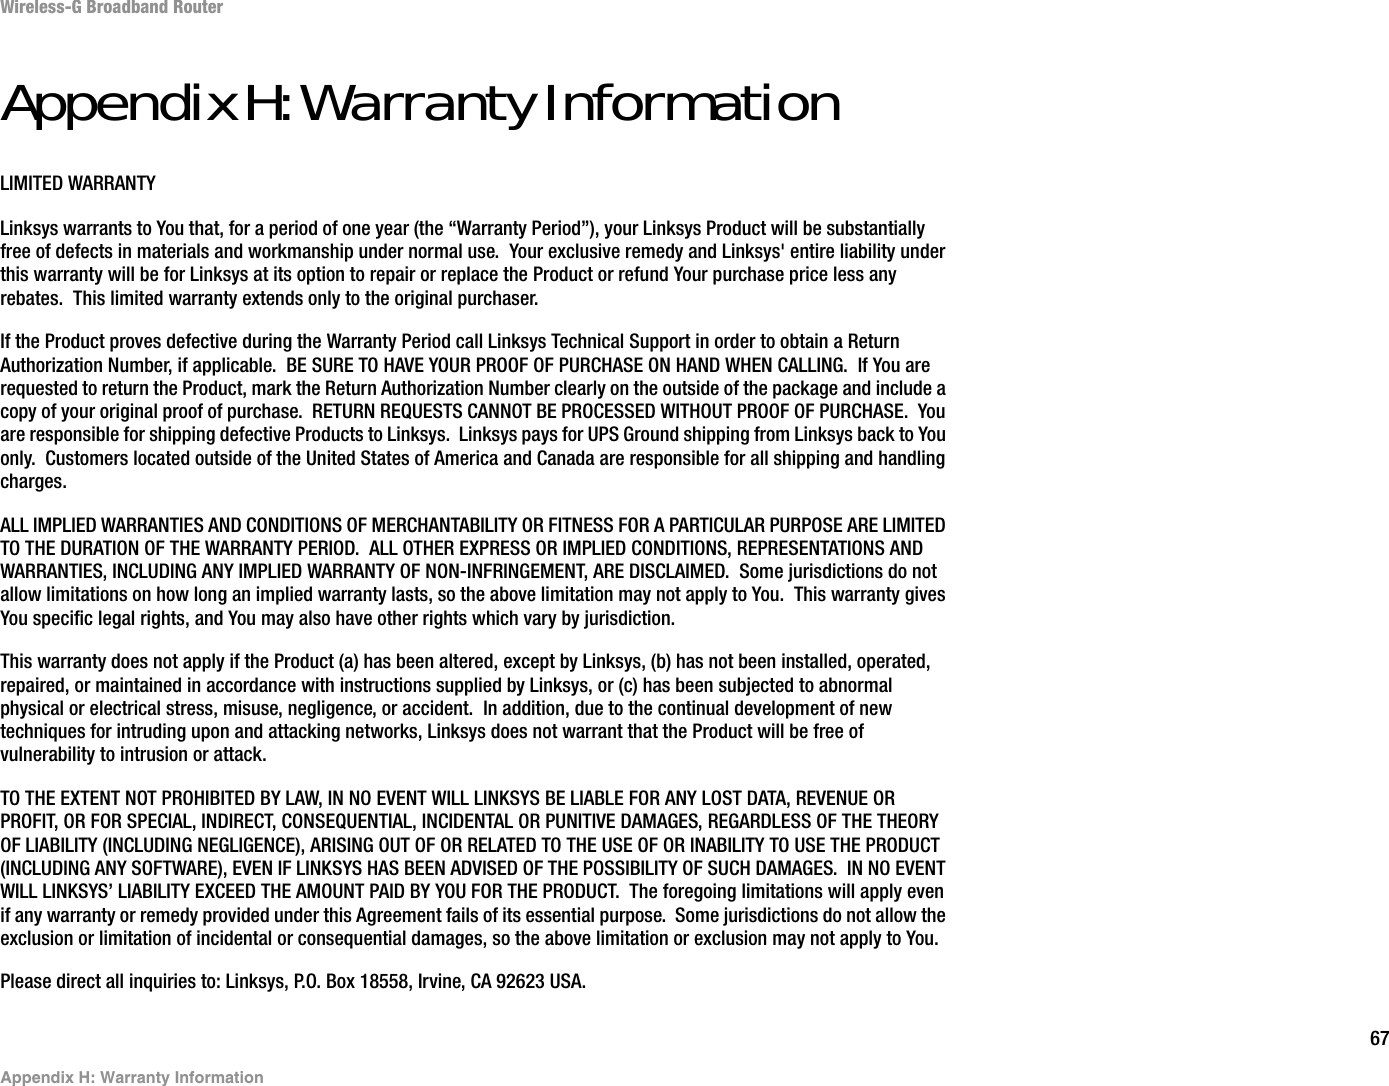 67Appendix H: Warranty InformationWireless-G Broadband RouterAppendix H: Warranty InformationLIMITED WARRANTYLinksys warrants to You that, for a period of one year (the “Warranty Period”), your Linksys Product will be substantiallyfree of defects in materials and workmanship under normal use.  Your exclusive remedy and Linksys&apos; entire liability under this warranty will be for Linksys at its option to repair or replace the Product or refund Your purchase price less any rebates.  This limited warranty extends only to the original purchaser.  If the Product proves defective during the Warranty Period call Linksys Technical Support in order to obtain a Return Authorization Number, if applicable.  BE SURE TO HAVE YOUR PROOF OF PURCHASE ON HAND WHEN CALLING.  If You are requested to return the Product, mark the Return Authorization Number clearly on the outside of the package and include a copy of your original proof of purchase.  RETURN REQUESTS CANNOT BE PROCESSED WITHOUT PROOF OF PURCHASE.  You are responsible for shipping defective Products to Linksys.  Linksys pays for UPS Ground shipping from Linksys back to You only.  Customers located outside of the United States of America and Canada are responsible for all shipping and handling charges. ALL IMPLIED WARRANTIES AND CONDITIONS OF MERCHANTABILITY OR FITNESS FOR A PARTICULAR PURPOSE ARE LIMITED TO THE DURATION OF THE WARRANTY PERIOD.  ALL OTHER EXPRESS OR IMPLIED CONDITIONS, REPRESENTATIONS AND WARRANTIES, INCLUDING ANY IMPLIED WARRANTY OF NON-INFRINGEMENT, ARE DISCLAIMED.  Some jurisdictions do not allow limitations on how long an implied warranty lasts, so the above limitation may not apply to You.  This warranty gives You specific legal rights, and You may also have other rights which vary by jurisdiction.This warranty does not apply if the Product (a) has been altered, except by Linksys, (b) has not been installed, operated, repaired, or maintained in accordance with instructions supplied by Linksys, or (c) has been subjected to abnormal physical or electrical stress, misuse, negligence, or accident.  In addition, due to the continual development of new techniques for intruding upon and attacking networks, Linksys does not warrant that the Product will be free of vulnerability to intrusion or attack.TO THE EXTENT NOT PROHIBITED BY LAW, IN NO EVENT WILL LINKSYS BE LIABLE FOR ANY LOST DATA, REVENUE OR PROFIT, OR FOR SPECIAL, INDIRECT, CONSEQUENTIAL, INCIDENTAL OR PUNITIVE DAMAGES, REGARDLESS OF THE THEORY OF LIABILITY (INCLUDING NEGLIGENCE), ARISING OUT OF OR RELATED TO THE USE OF OR INABILITY TO USE THE PRODUCT (INCLUDING ANY SOFTWARE), EVEN IF LINKSYS HAS BEEN ADVISED OF THE POSSIBILITY OF SUCH DAMAGES.  IN NO EVENT WILL LINKSYS’ LIABILITY EXCEED THE AMOUNT PAID BY YOU FOR THE PRODUCT.  The foregoing limitations will apply even if any warranty or remedy provided under this Agreement fails of its essential purpose.  Some jurisdictions do not allow the exclusion or limitation of incidental or consequential damages, so the above limitation or exclusion may not apply to You.Please direct all inquiries to: Linksys, P.O. Box 18558, Irvine, CA 92623 USA.